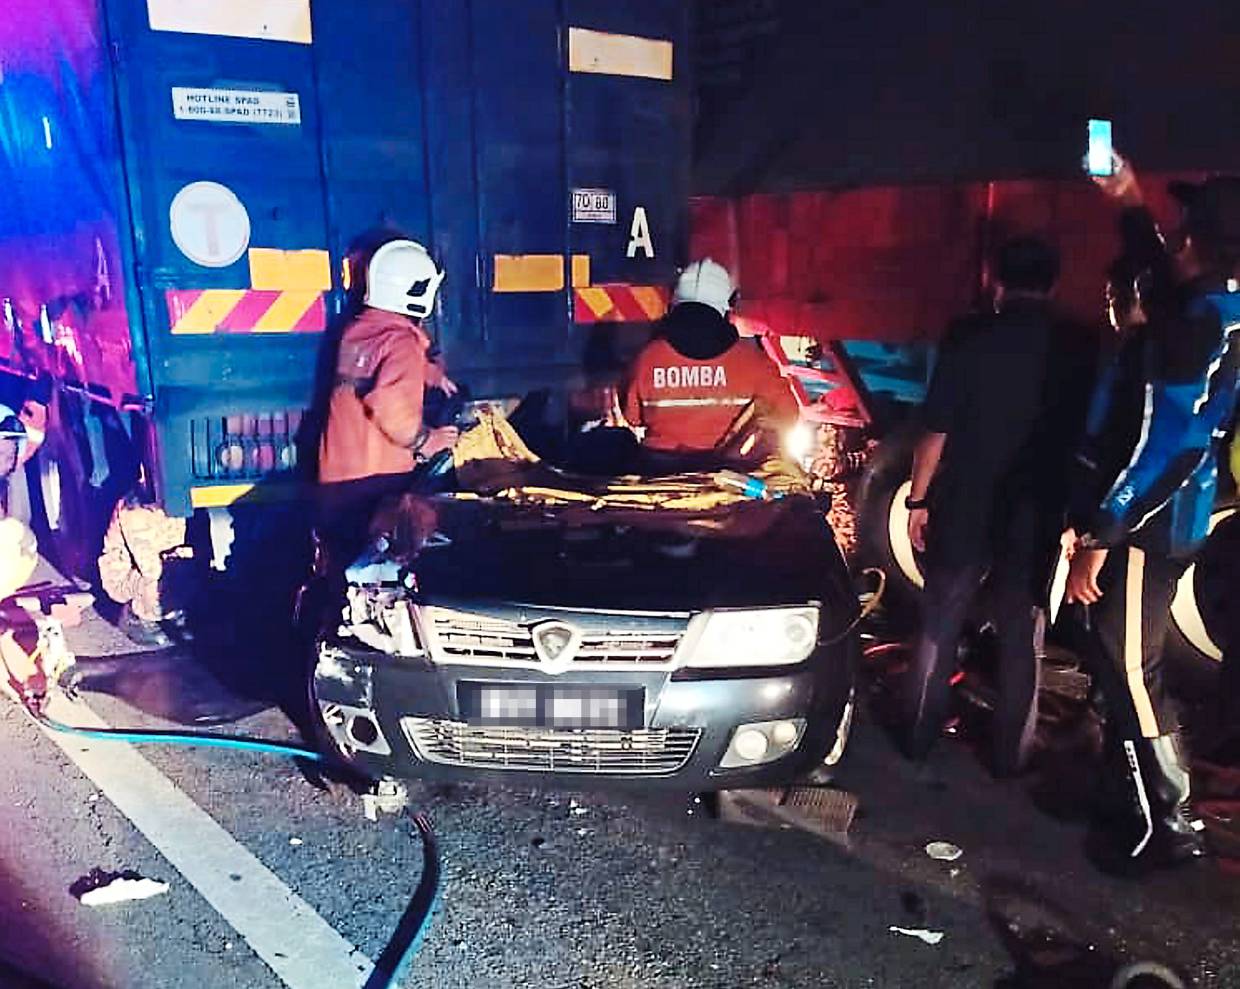 latest accident news in malaysia